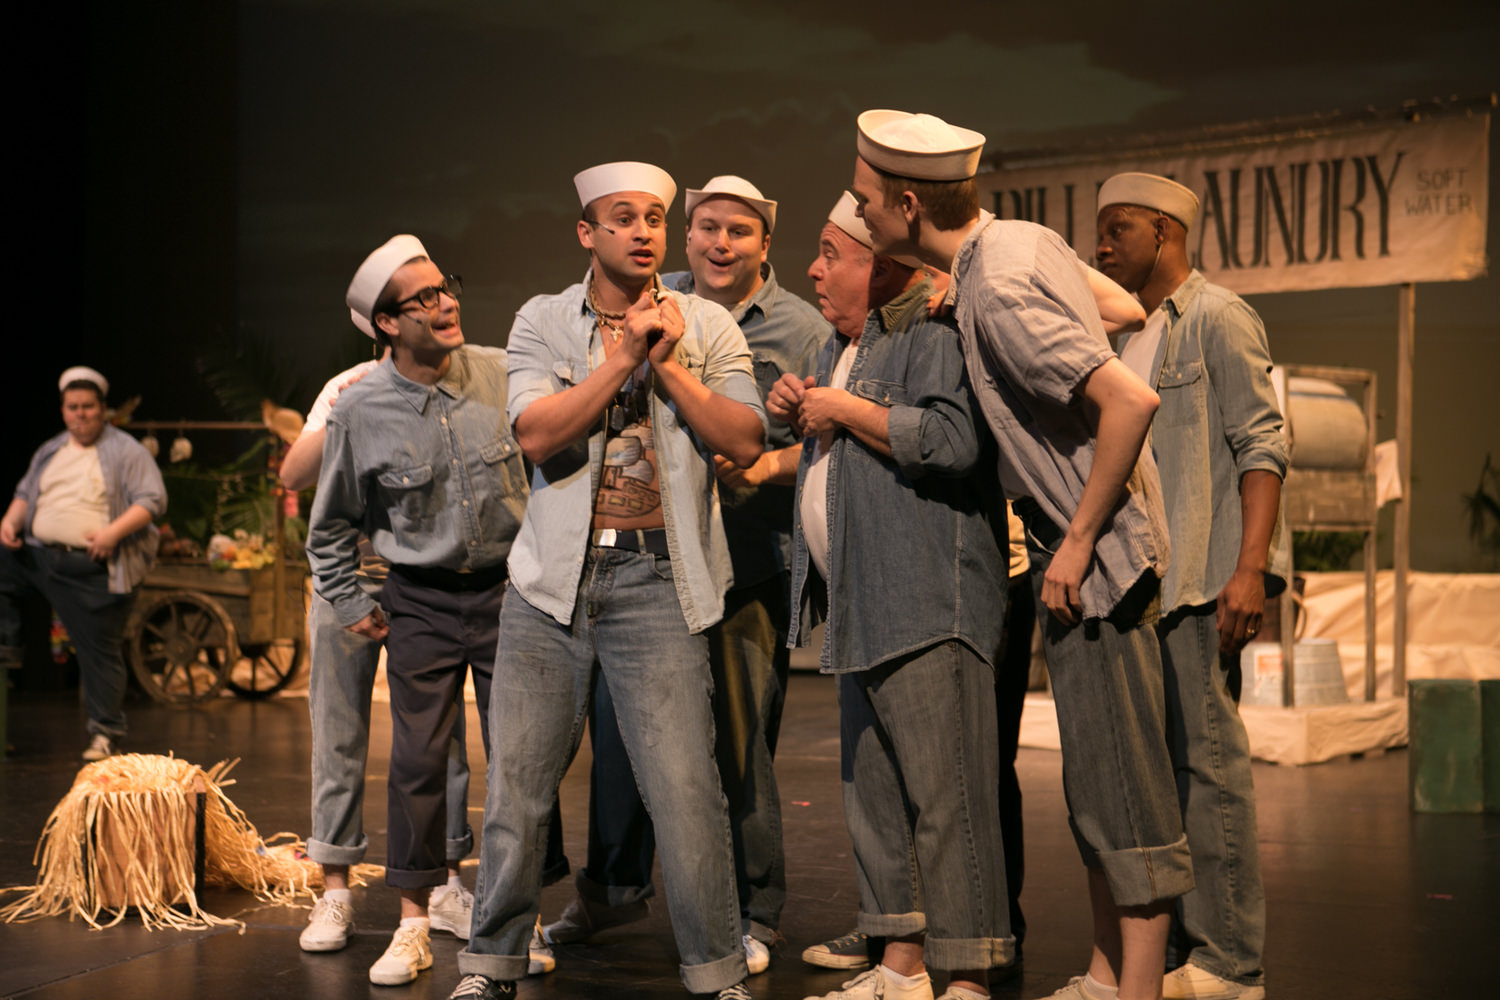 Kevin Barreca as Luther Billis and seabees (Photo by Burdett Photography)